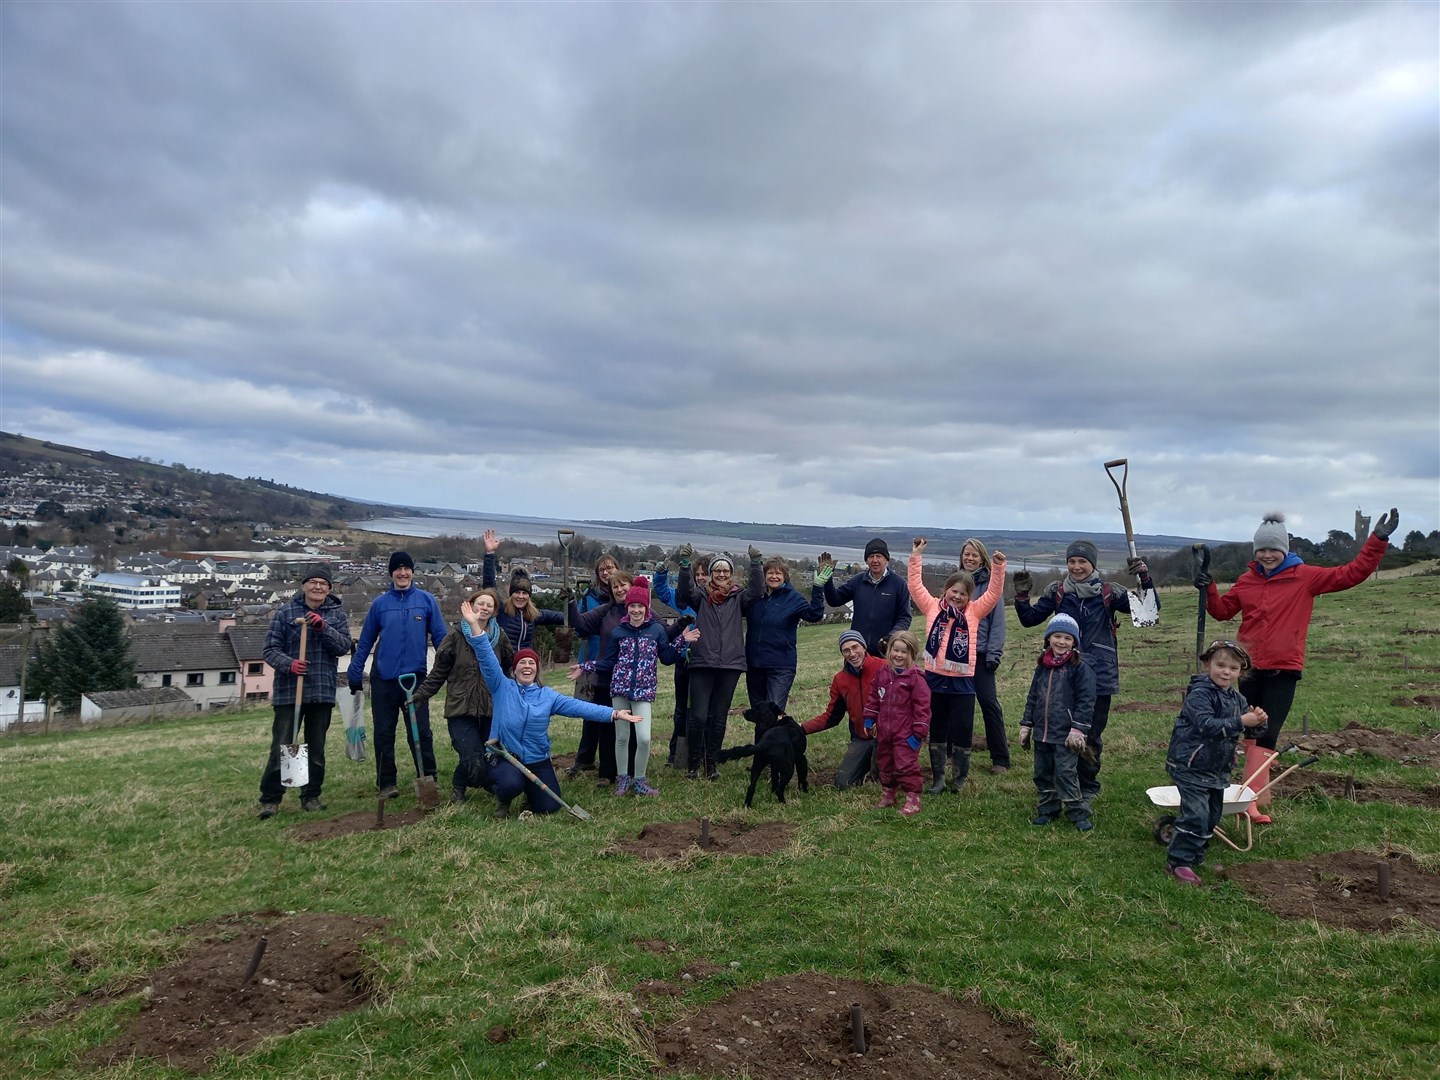 Dingwall Community Woodland is working to rewild a field on the hillside west of the town for community use.